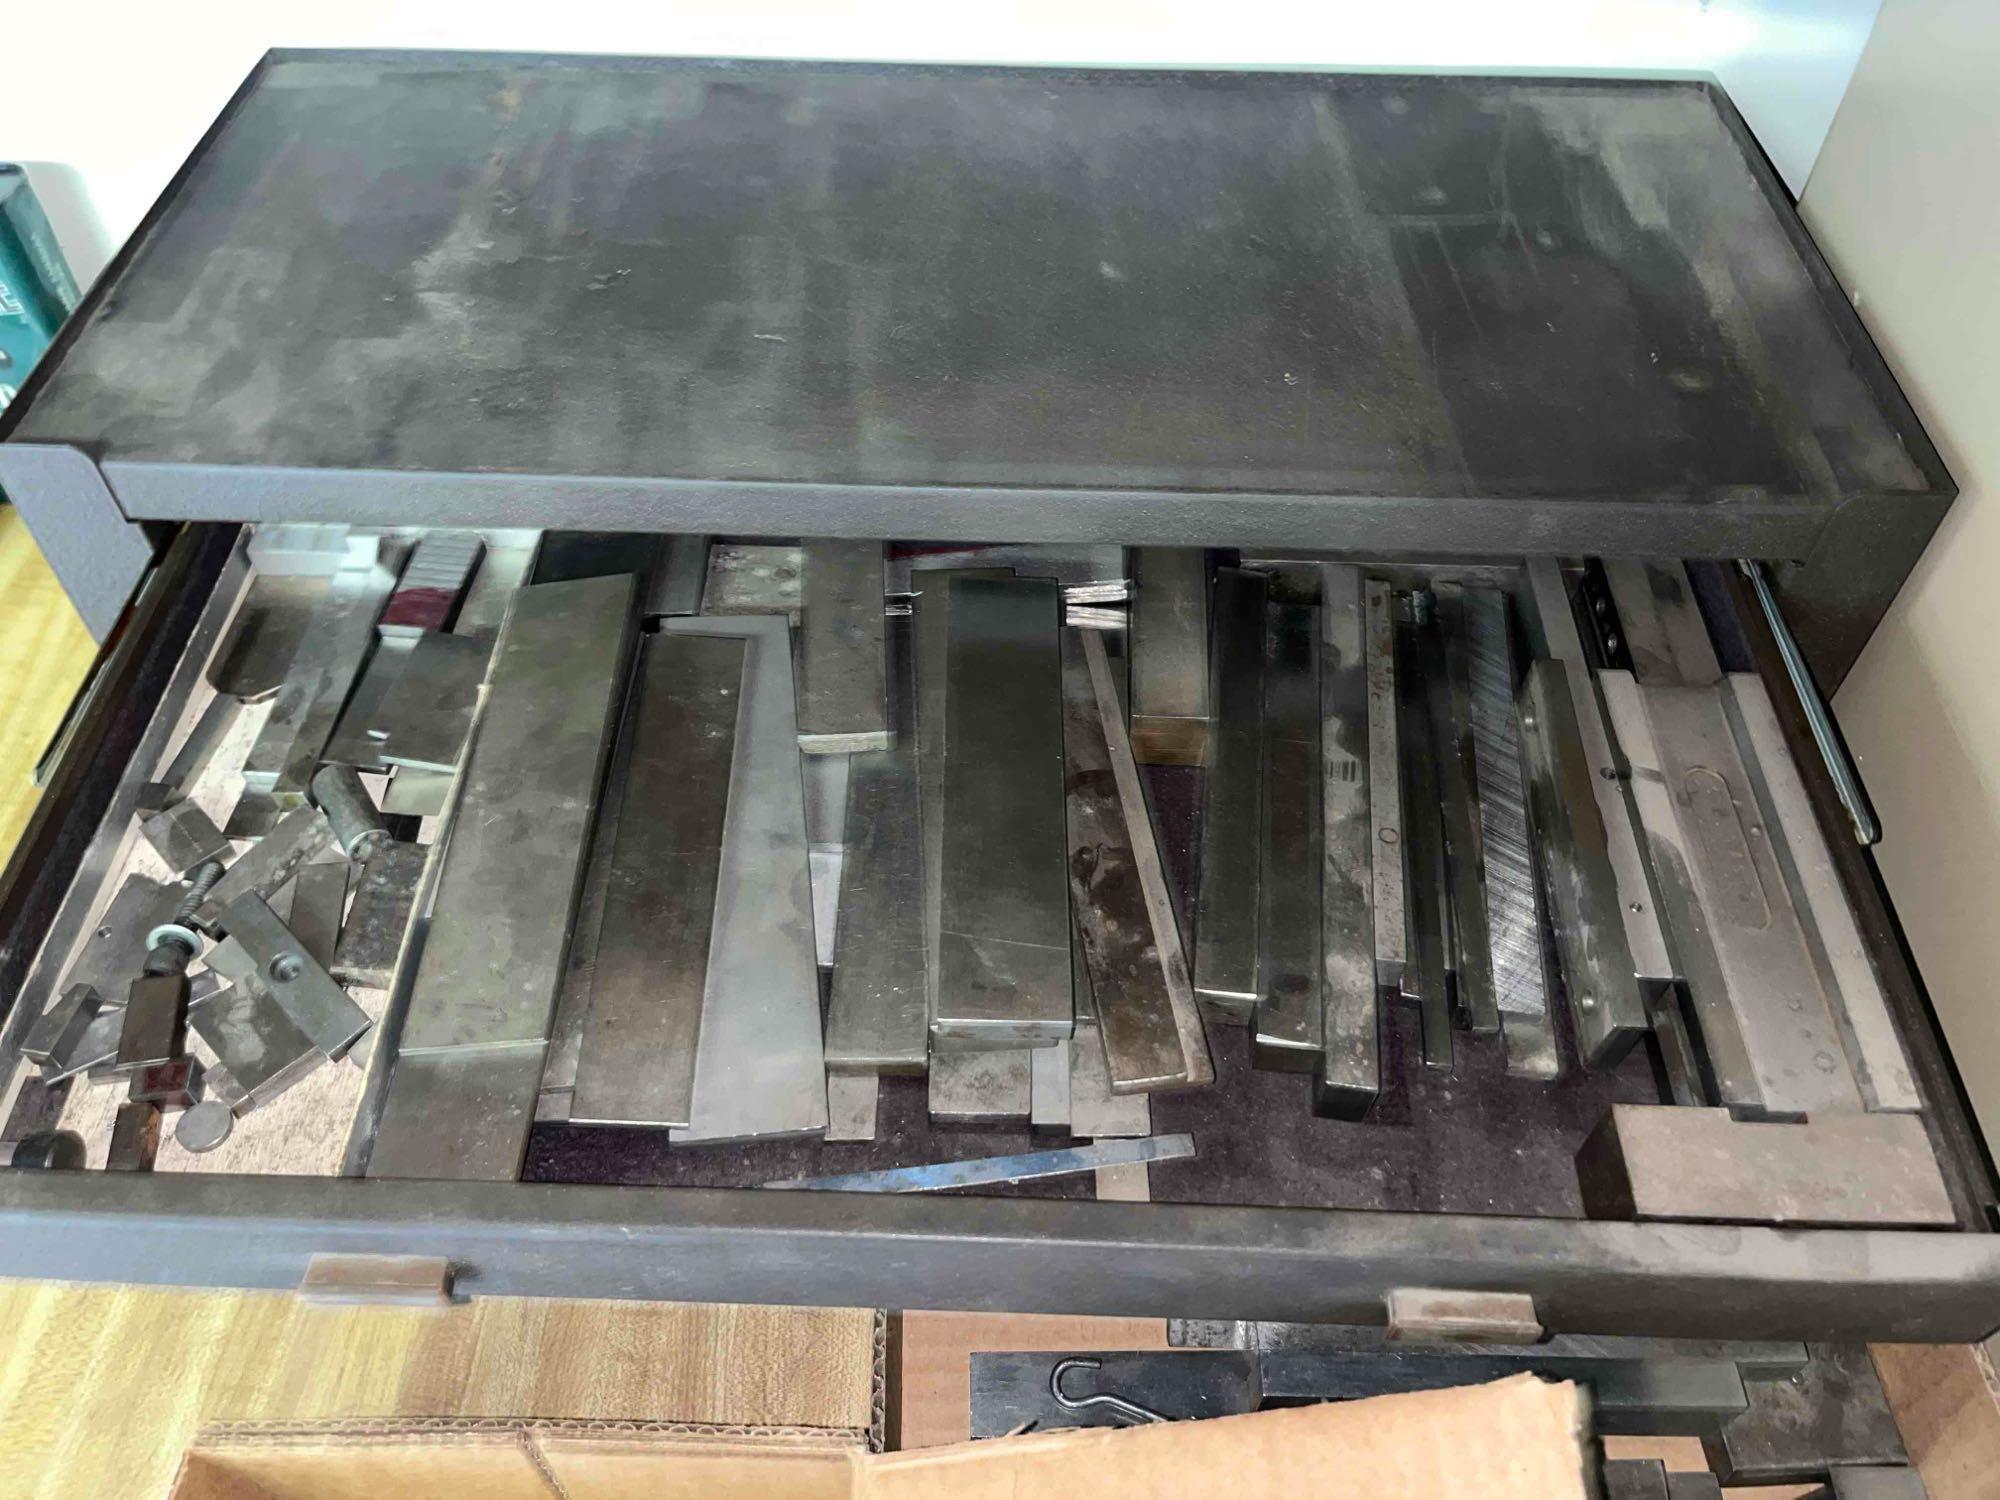 Machinist Box and Tooling